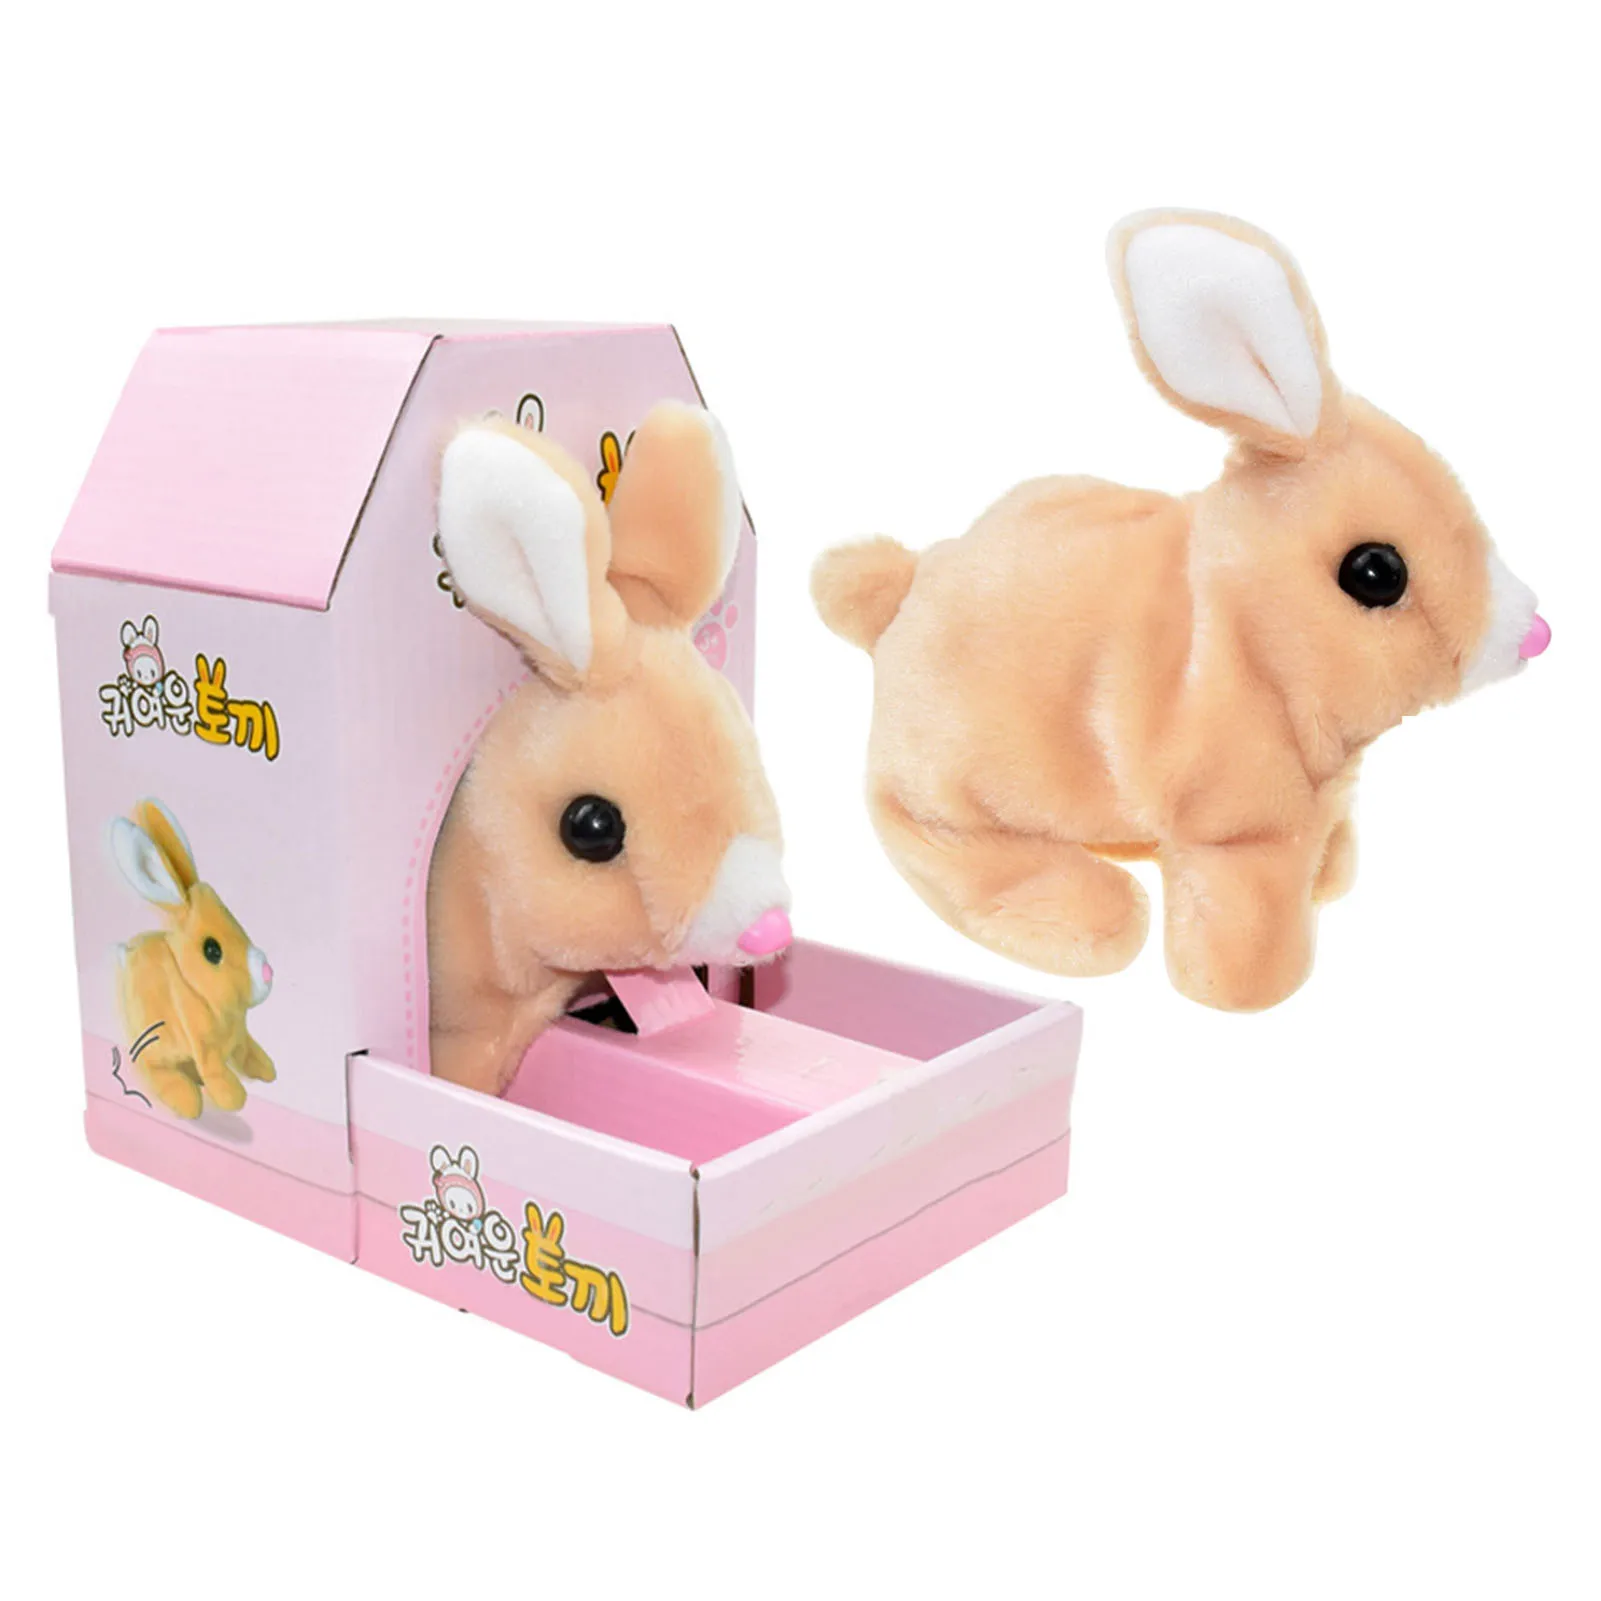 

Walking Rabbit Toy Electronic Interactive Pet Rabbit Realistic Toy Rabbits That Act Real Walking Talking Ears Wagging For Kids